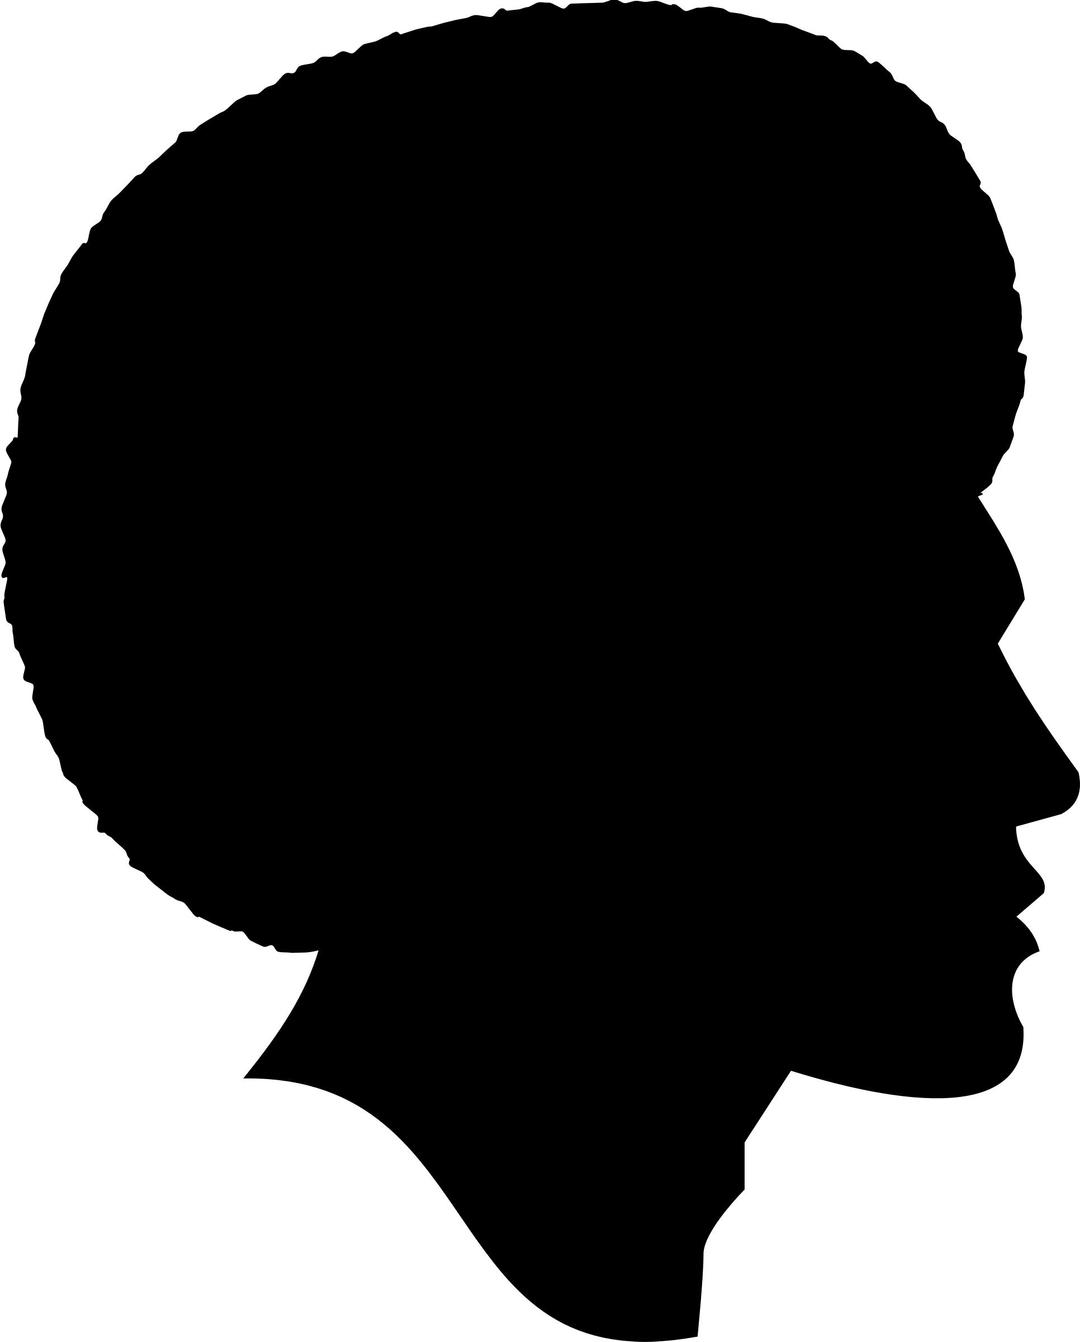 African American Male Silhouette - Remix w/o Pick png transparent